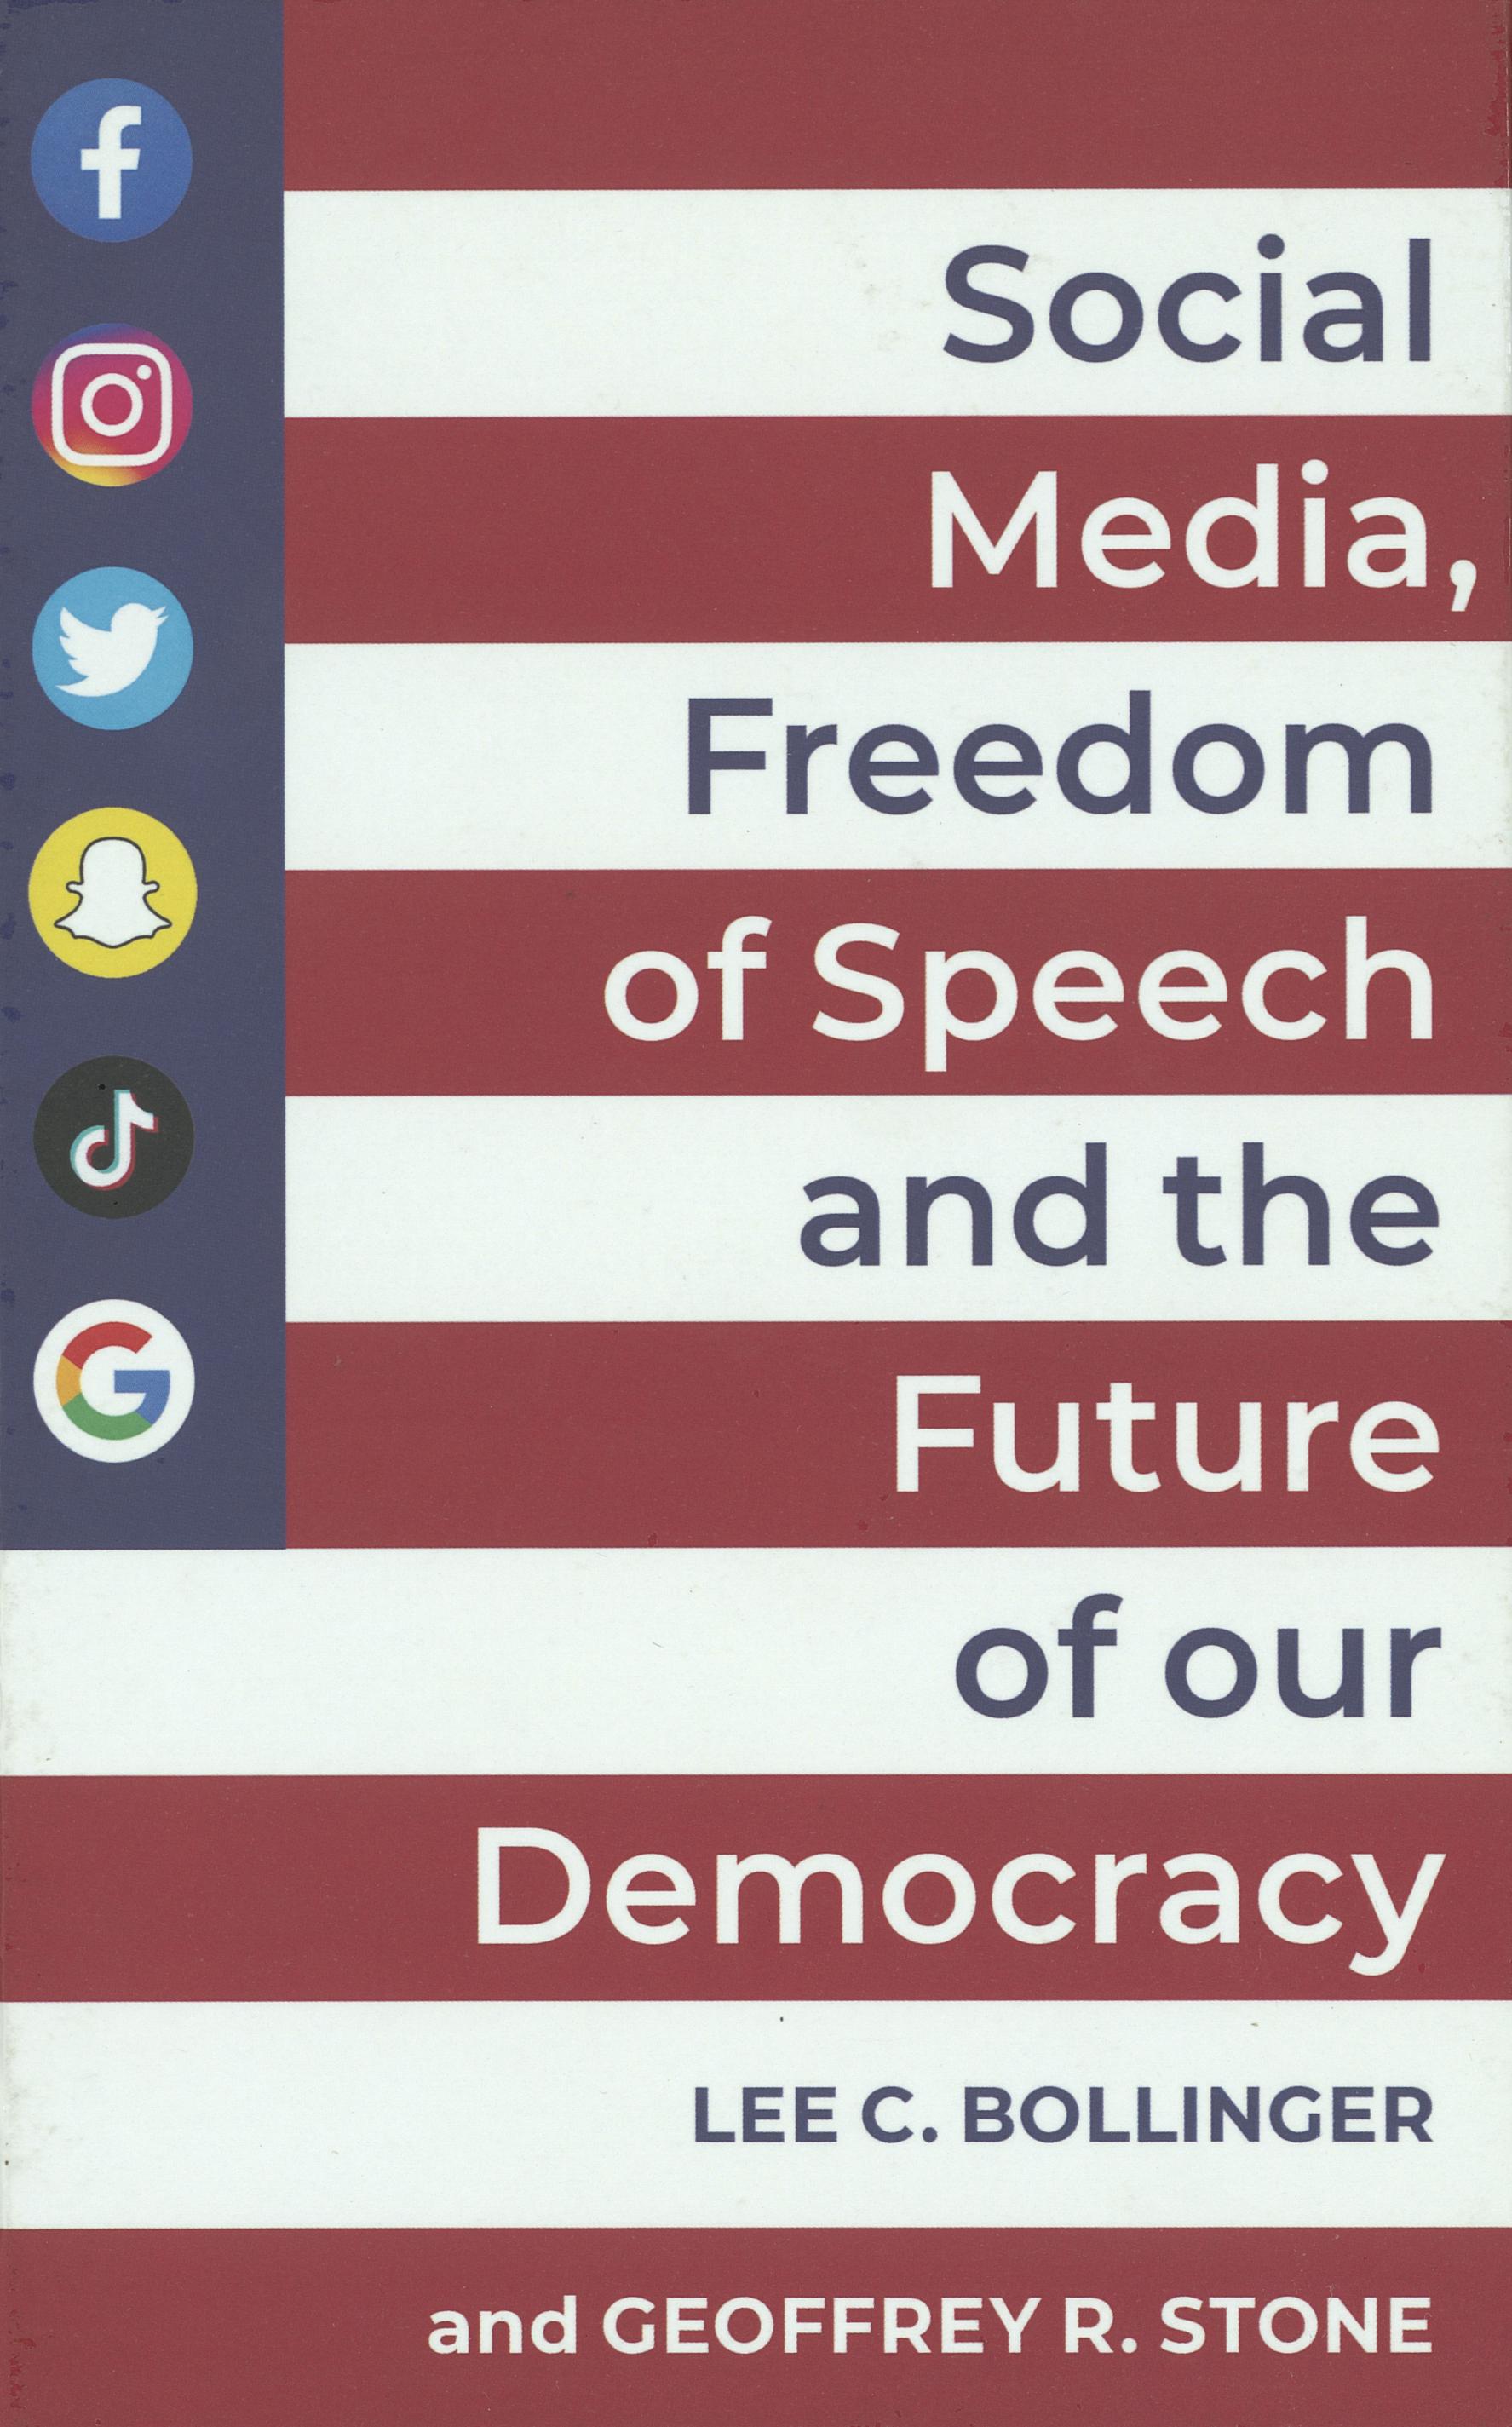 Social media, freedom of speech, and the future of our democracy